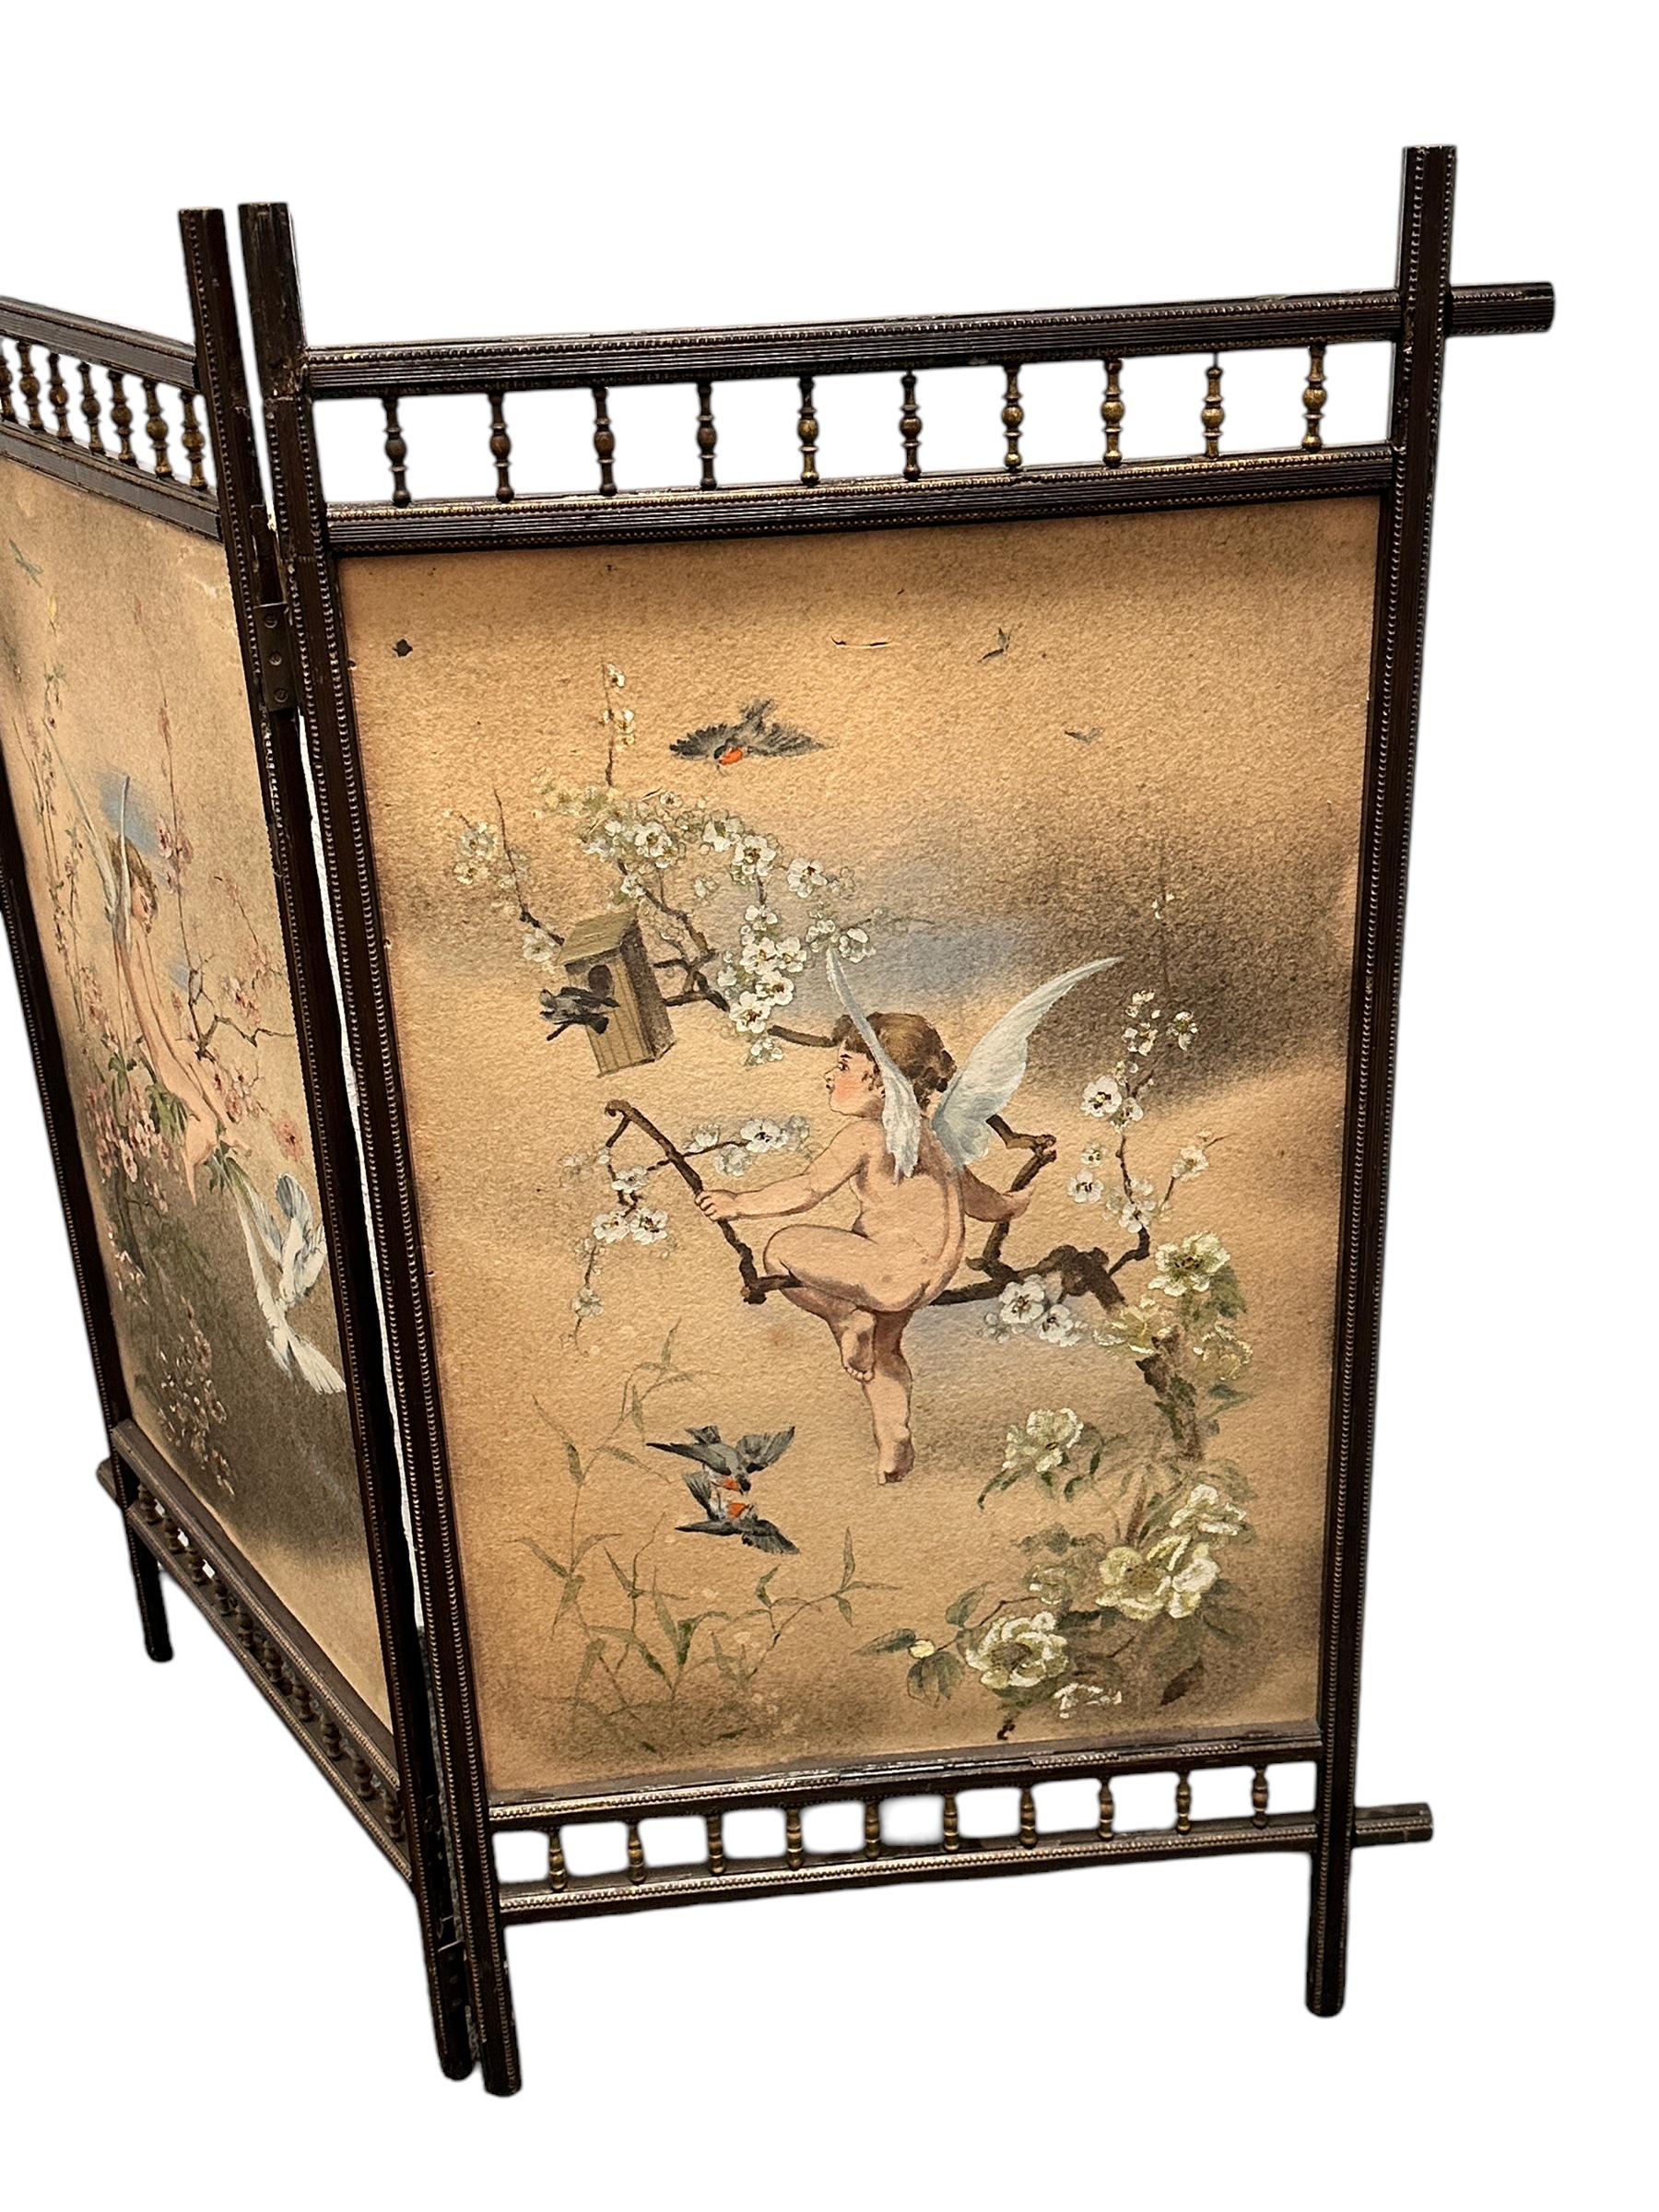 German Antique Two Panel Screen Hand Painted on Fabric and Wood, Early 1900s For Sale